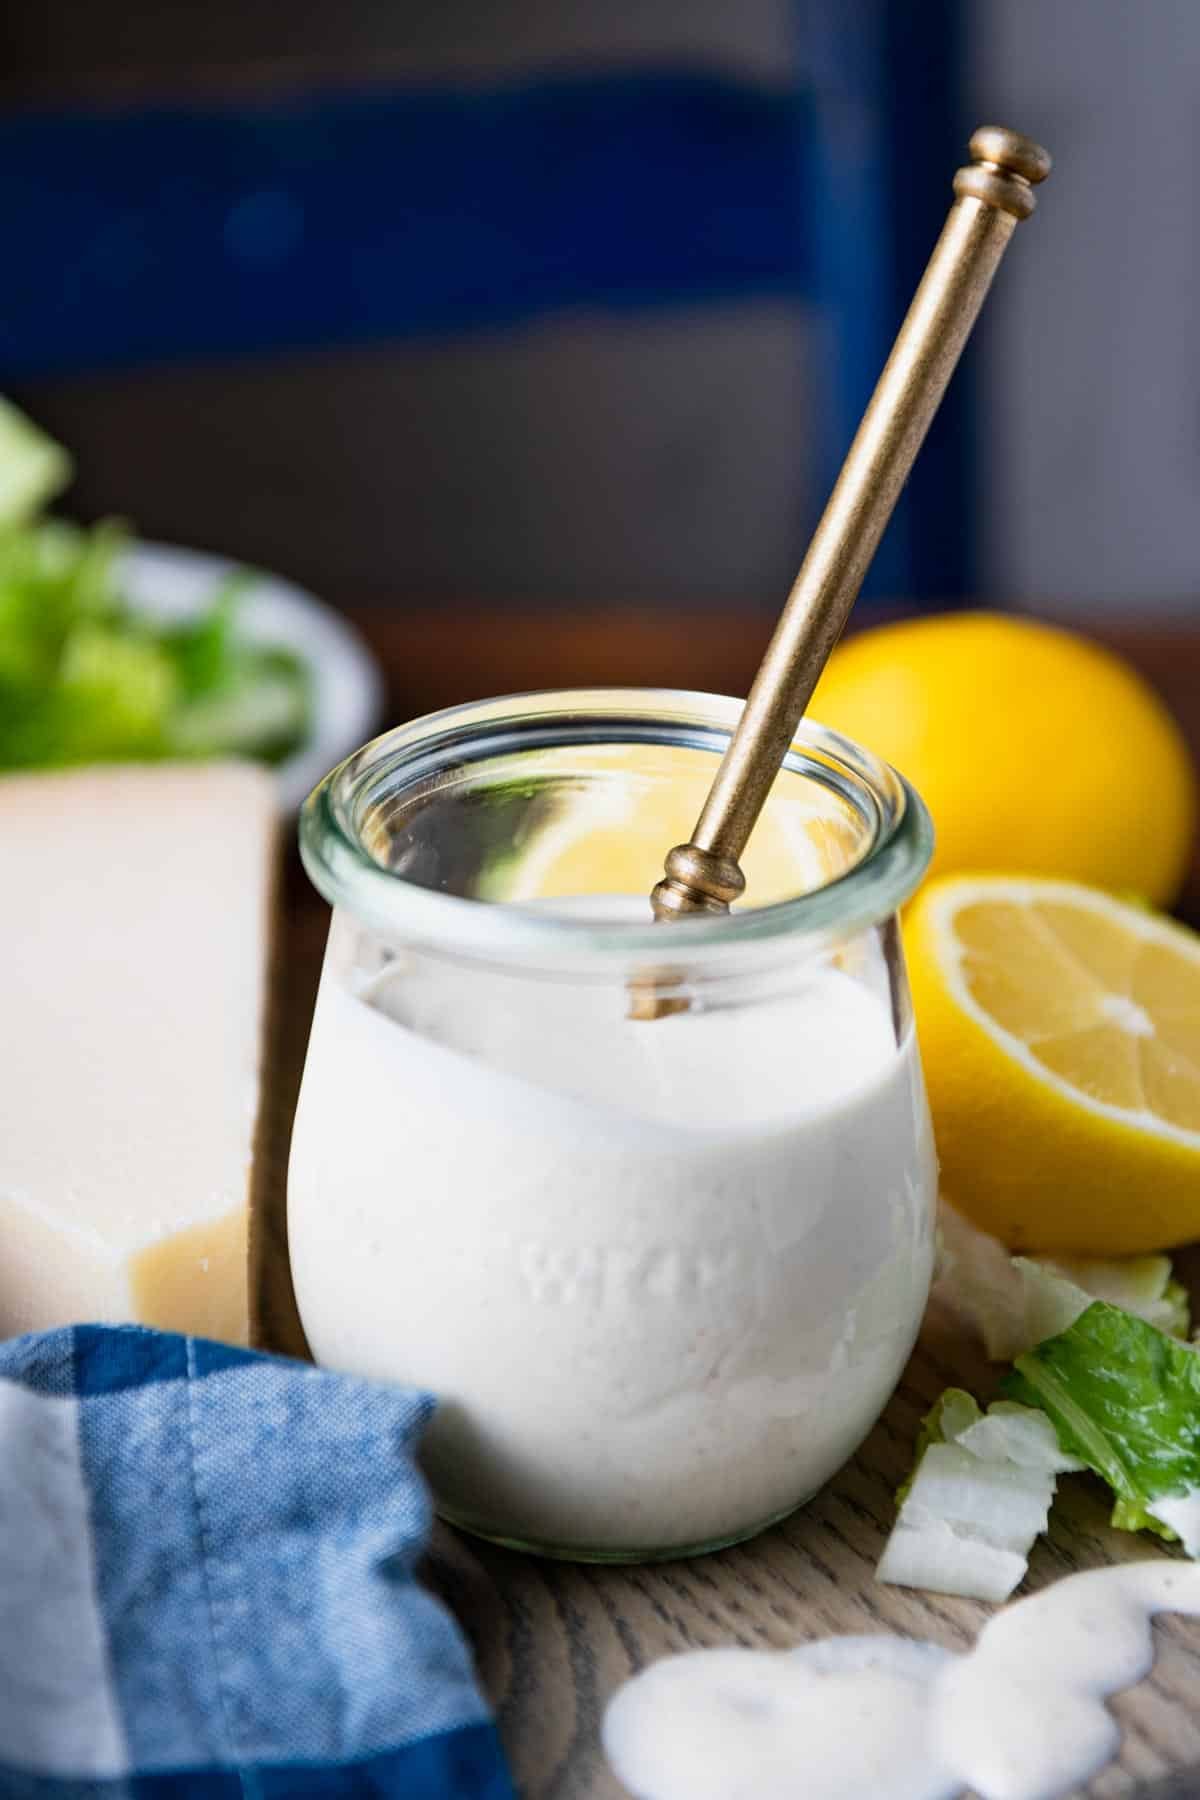 Gold spoon in a glass jar of homemade caesar salad dressing.